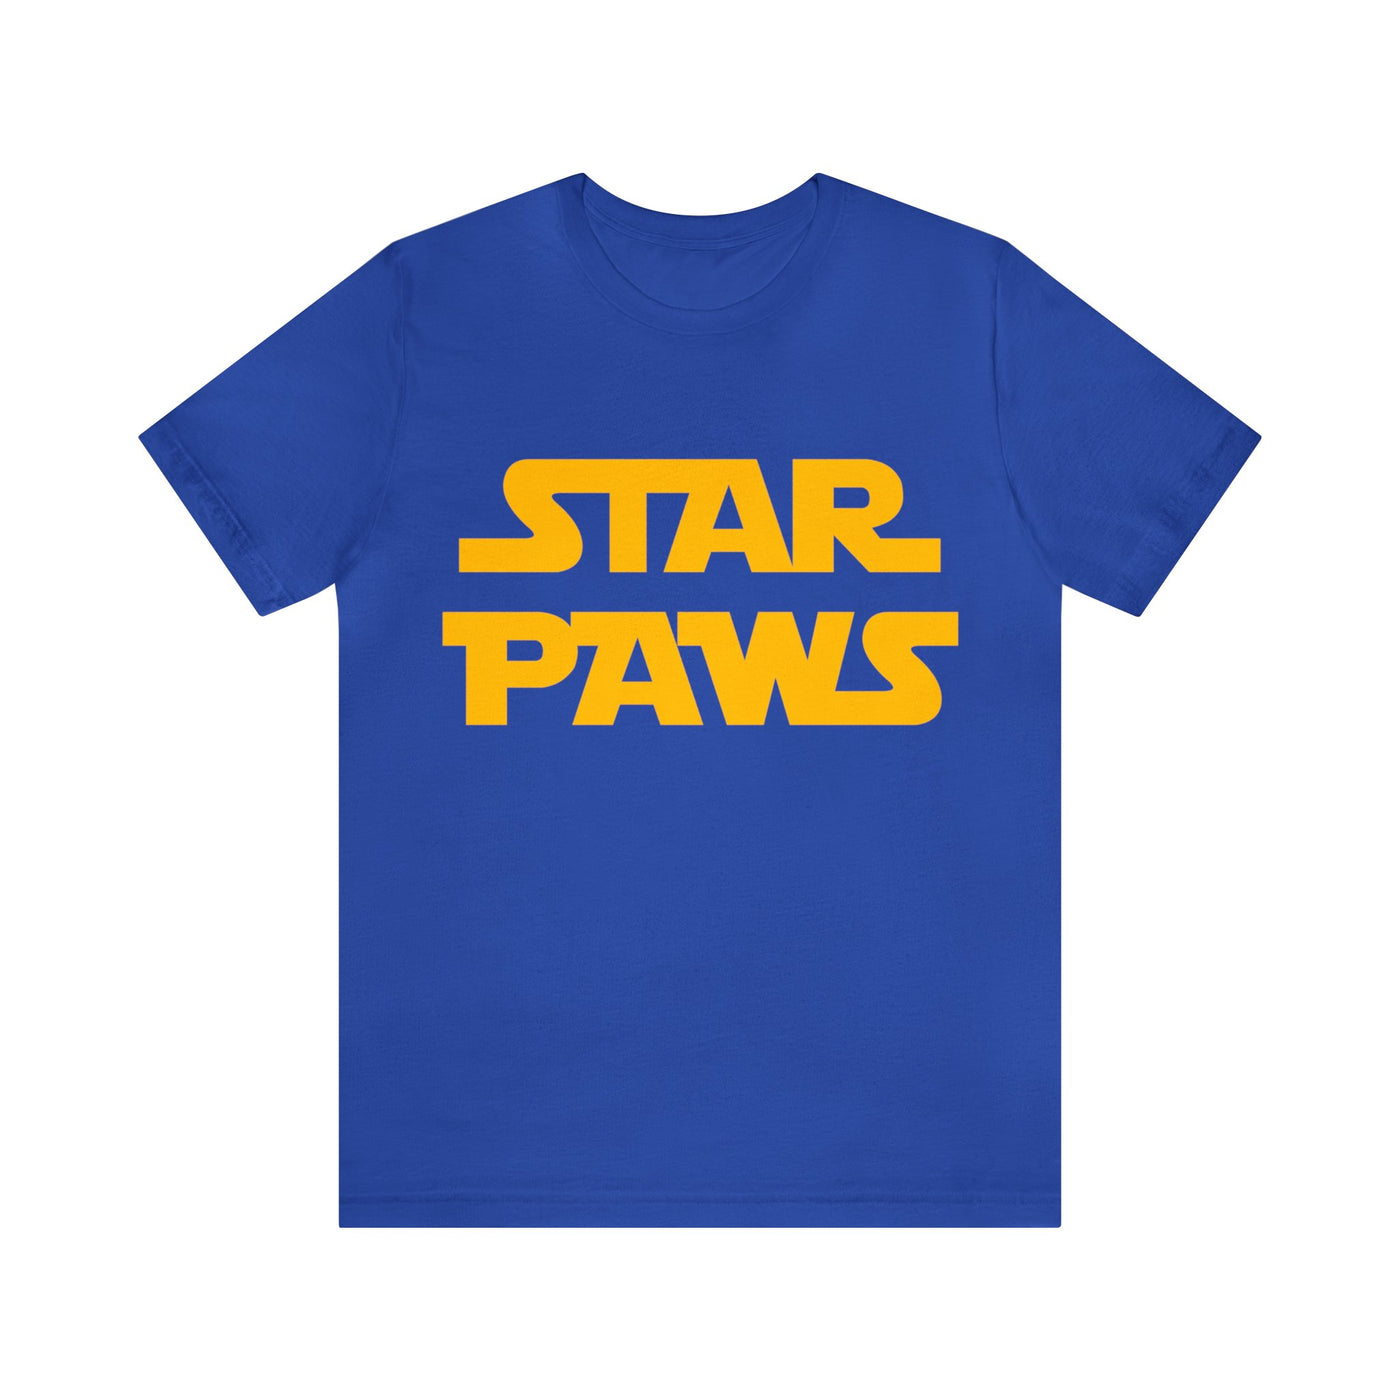 Star Paws Colored Print T-Shirt